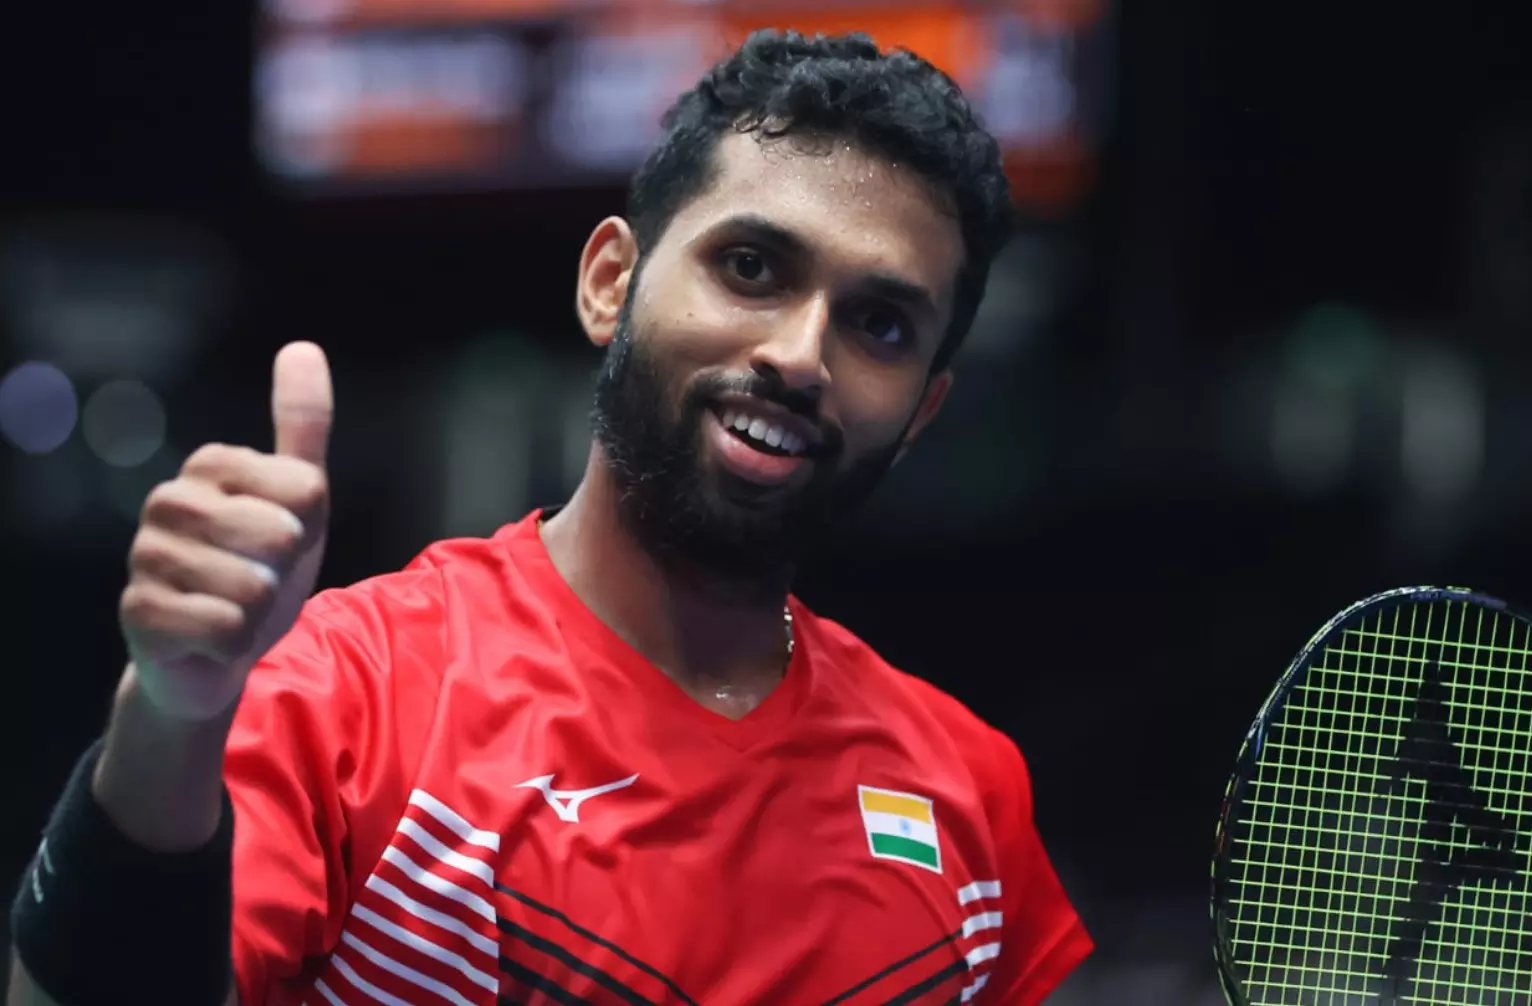 BWF World Tour Finals, HS Prannoy vs Lu Guang Zu: Live streaming, match time, head to head, preview